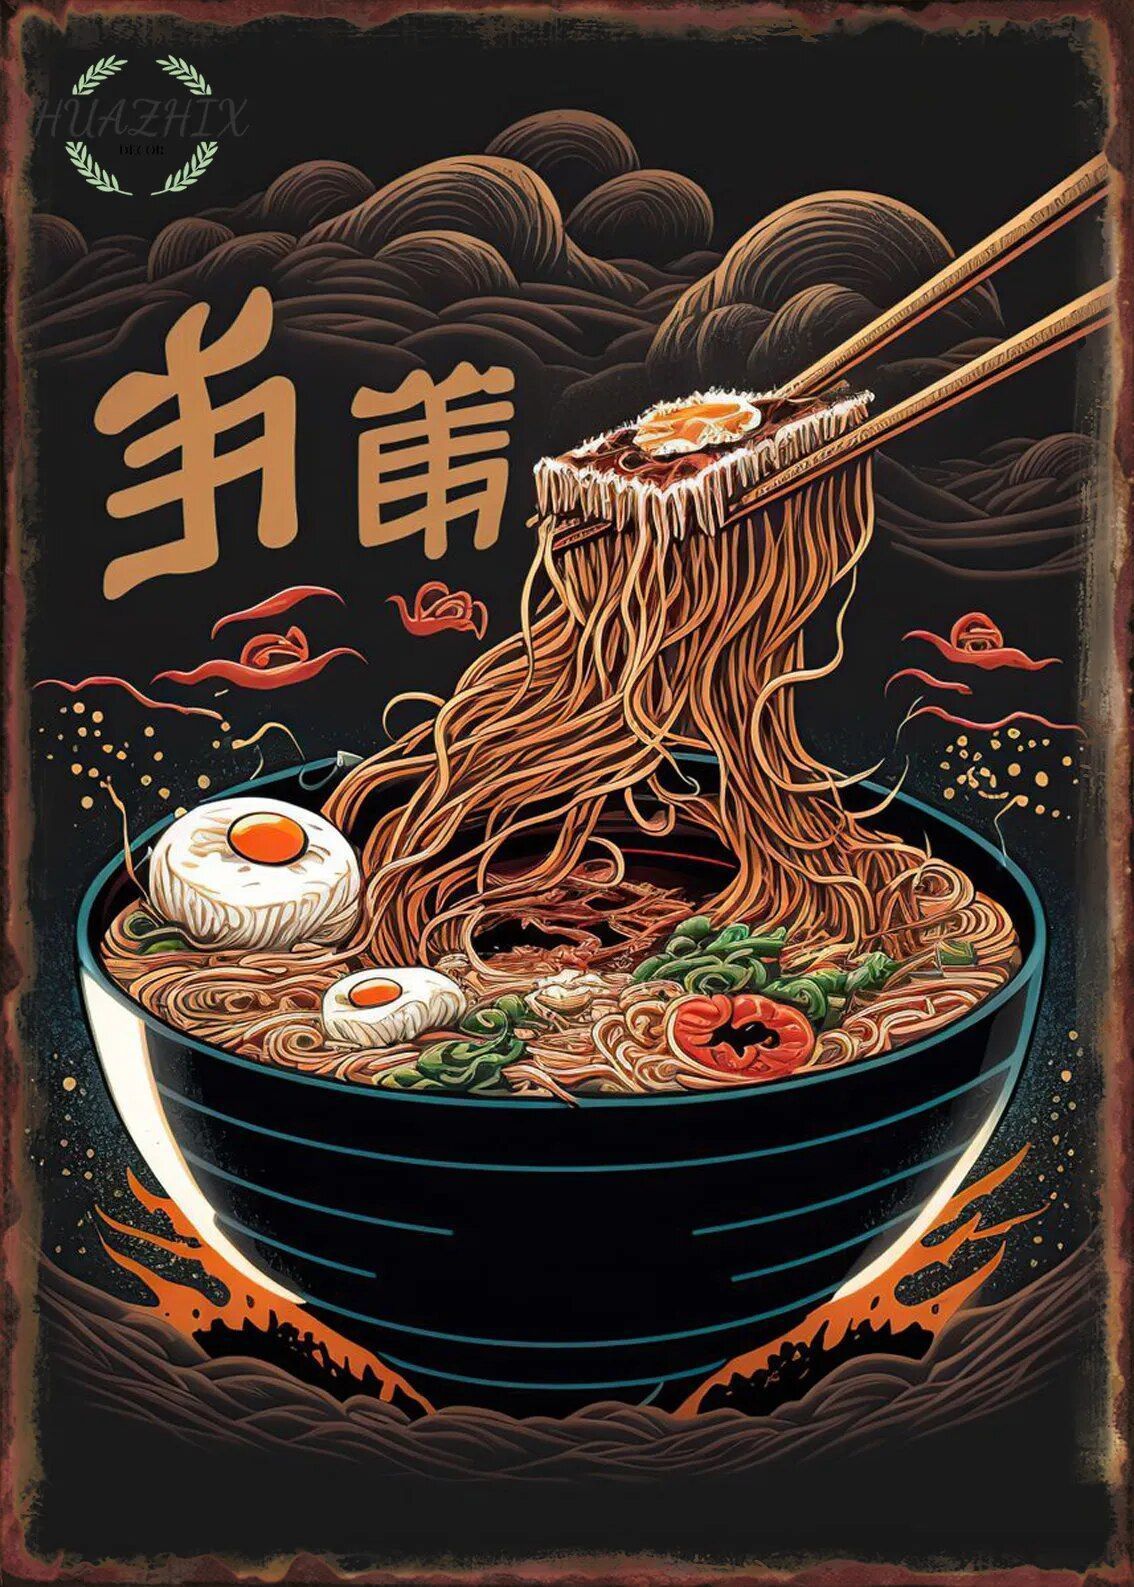 Japanese Delicious Noodles Metal Tin Sign Poster for Ramen Restaurant Decoration of Japan Painting Art Wall Aesthetic Decor